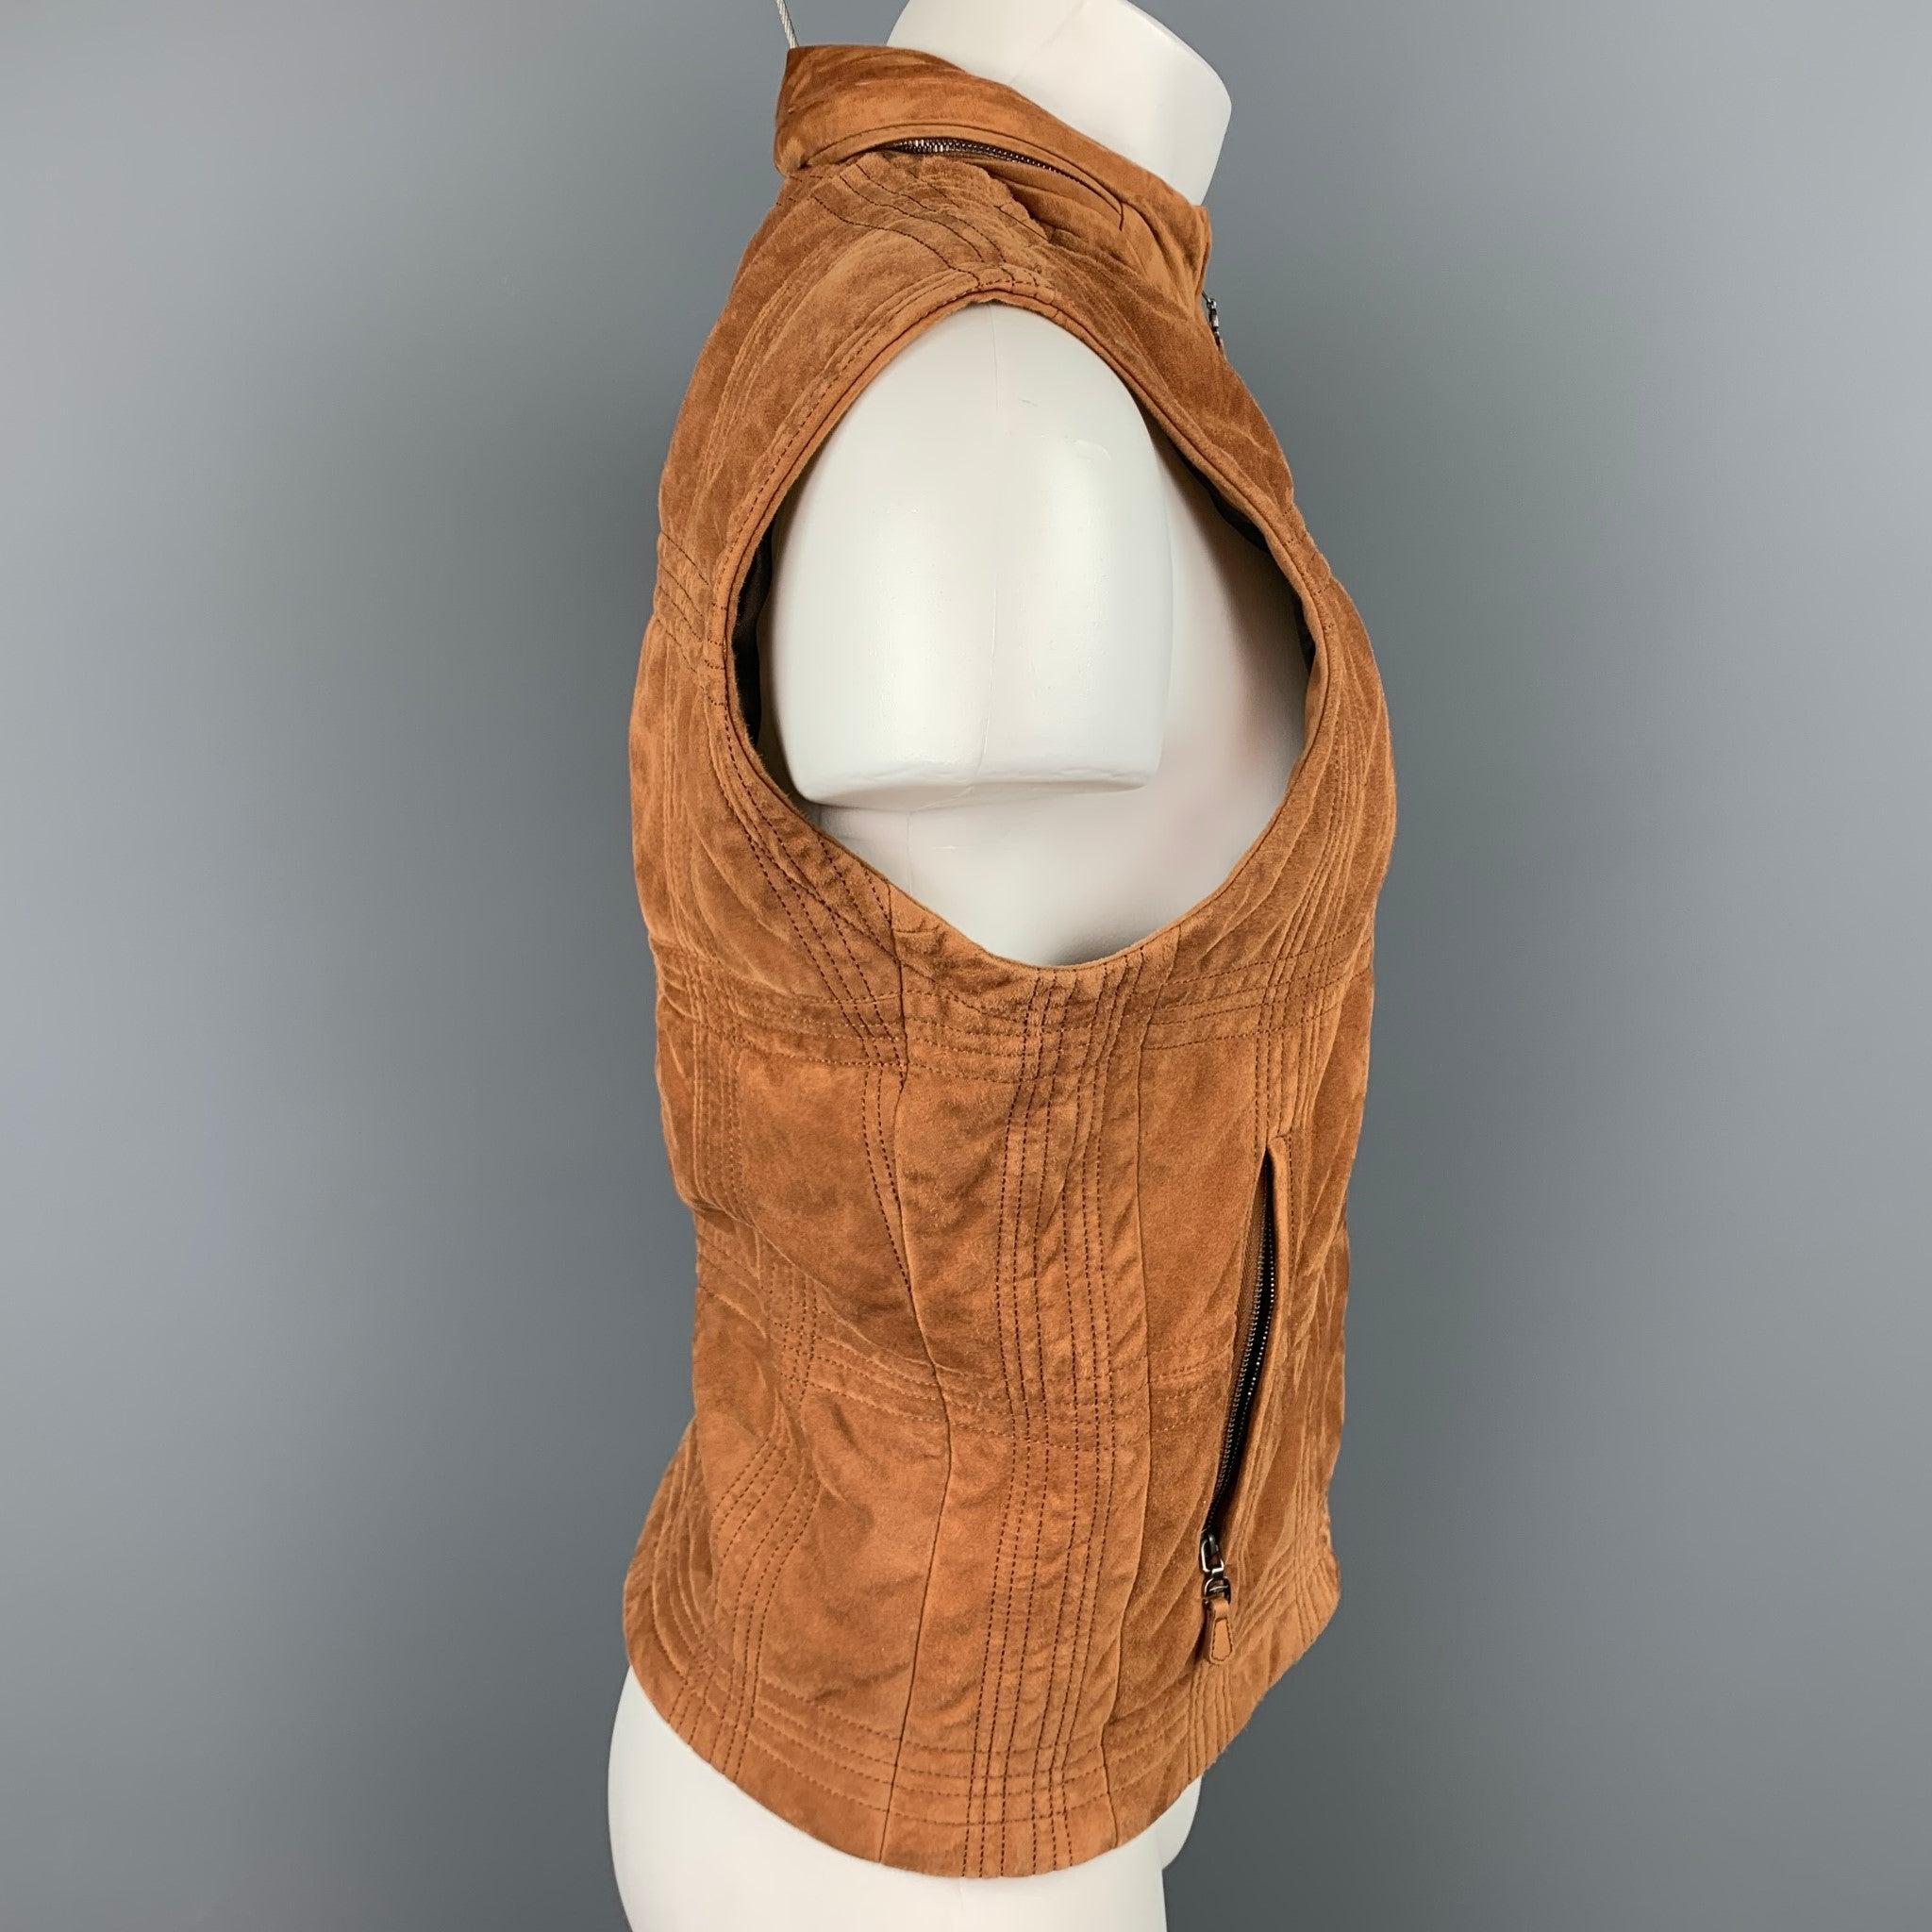 SALVATORE FERRAGAMO vest comes in a tan suede with a monogram print liner featuring a hidden hood design, top stitching, slit pockets, and a full zip closure. Made in Italy.Very Good
Pre-Owned Condition. 

Marked:   IT 52 

Measurements: 
